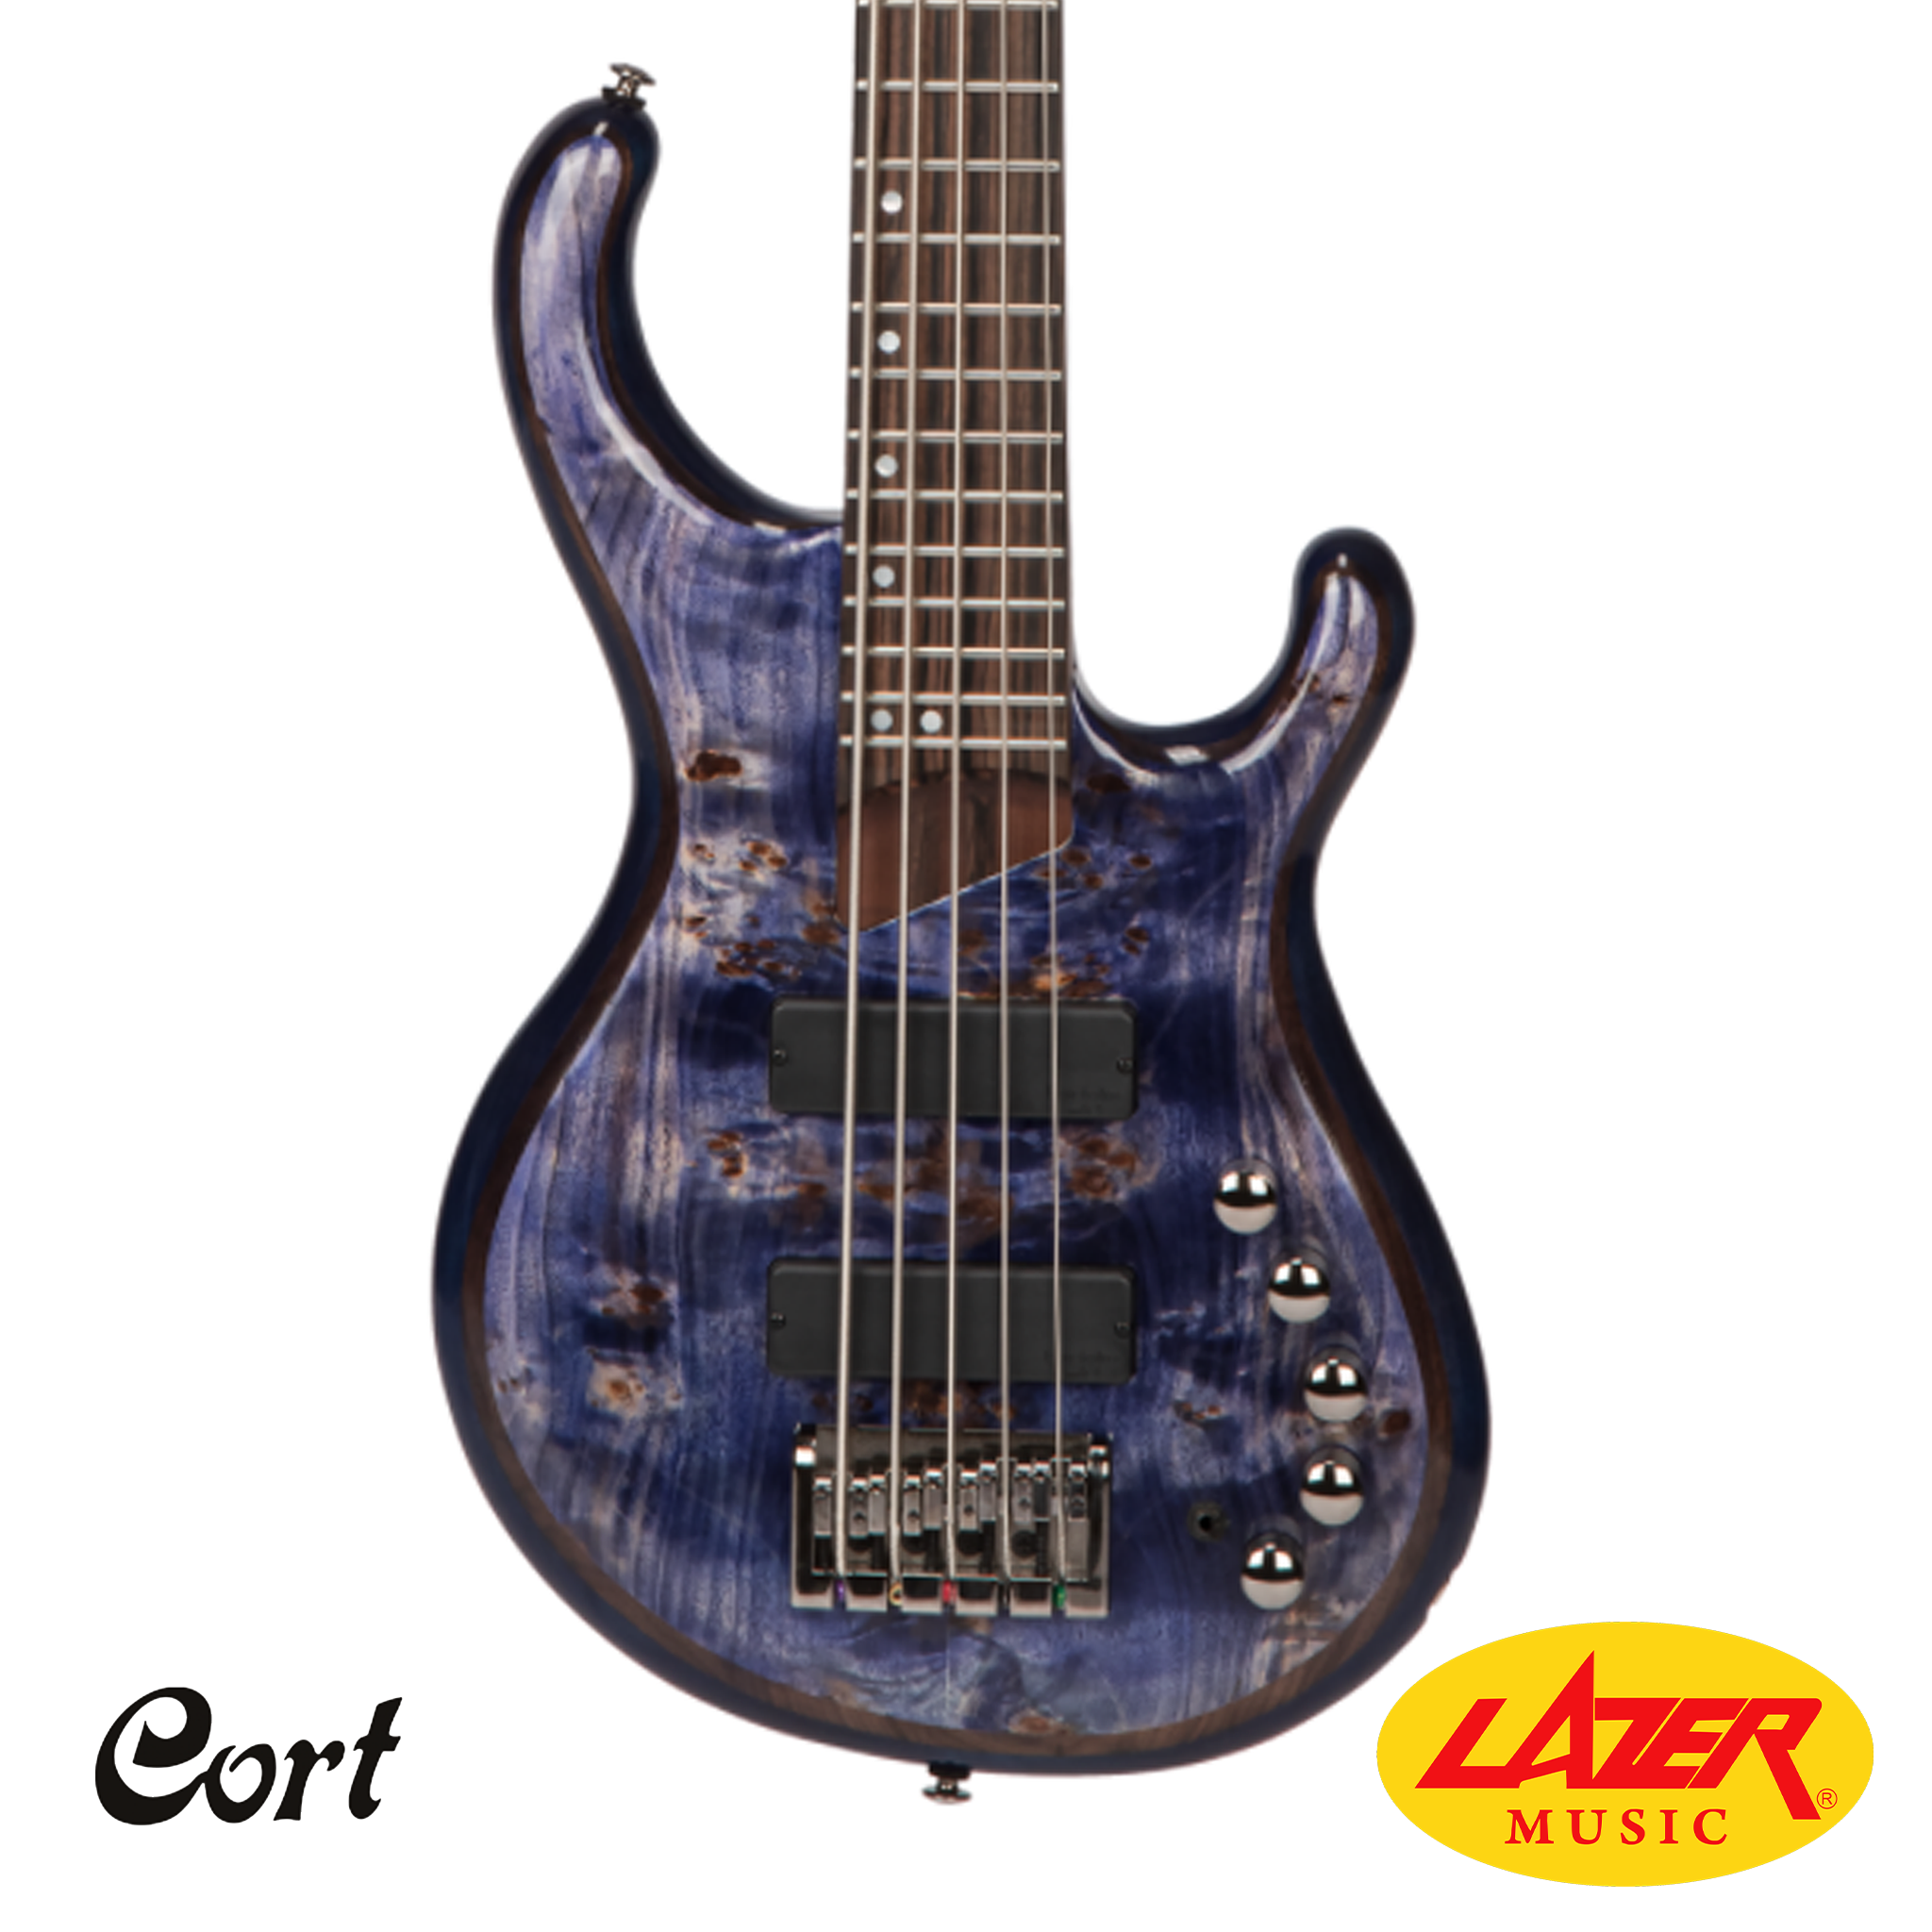 Cort PERSONA5 Alder Body 5 String Bass With Bartolini Preamp, Hipshot Tuners, and Bag